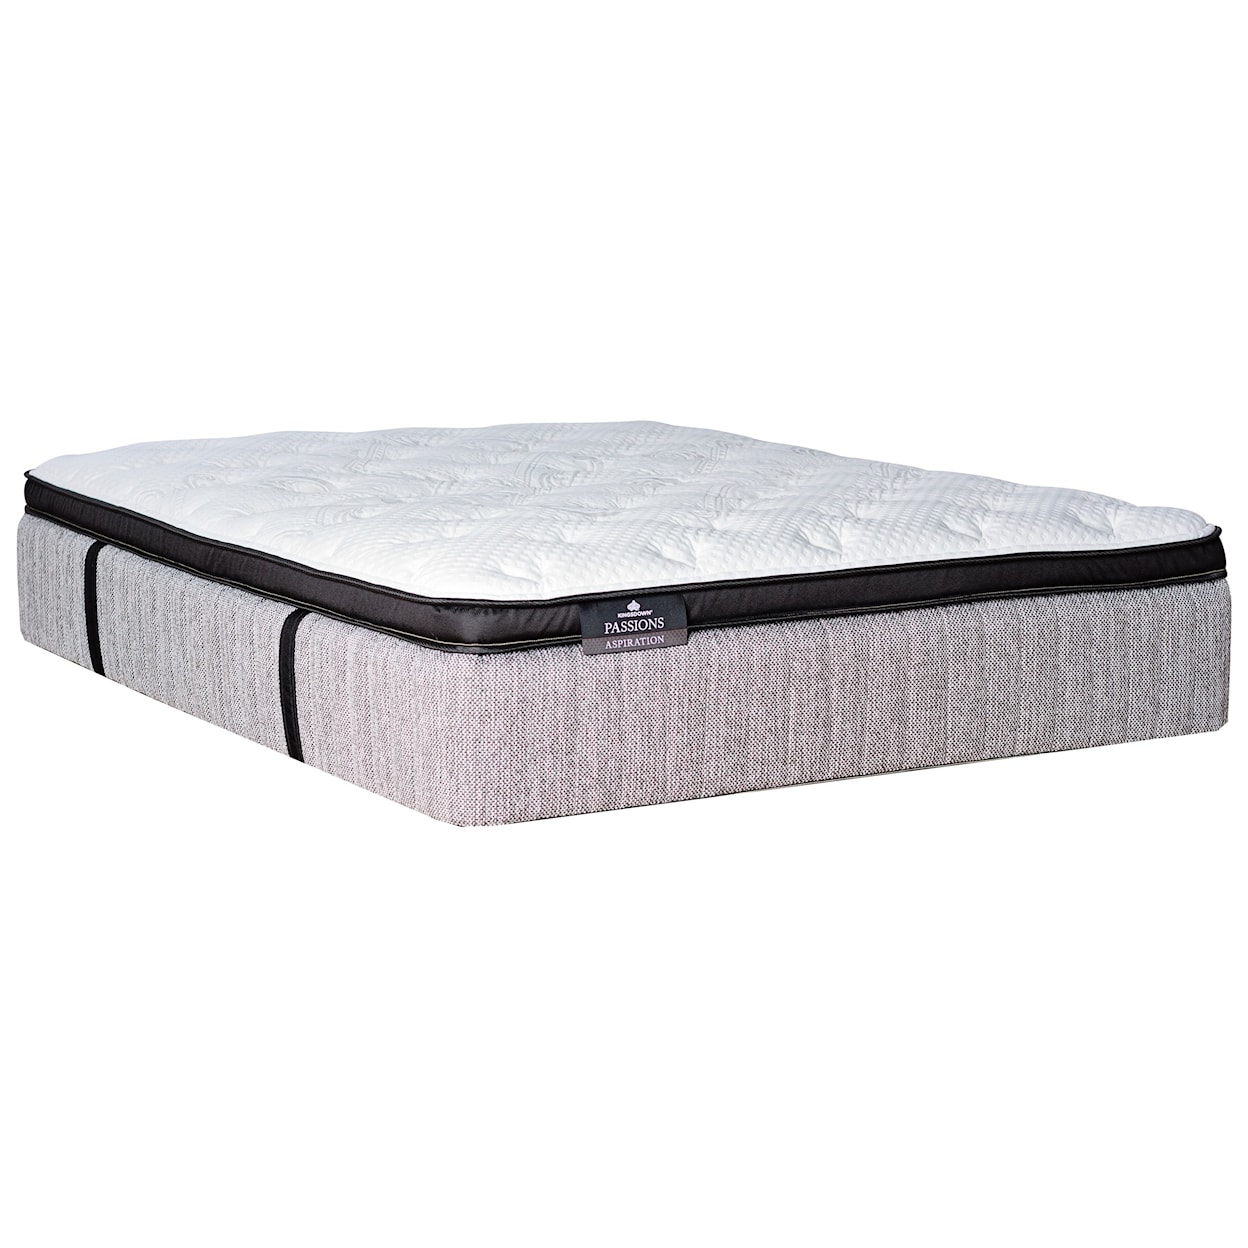 Kingsdown Passions Aspiration Pillow Top Twin Pillow Top Pocketed Coil Mattress